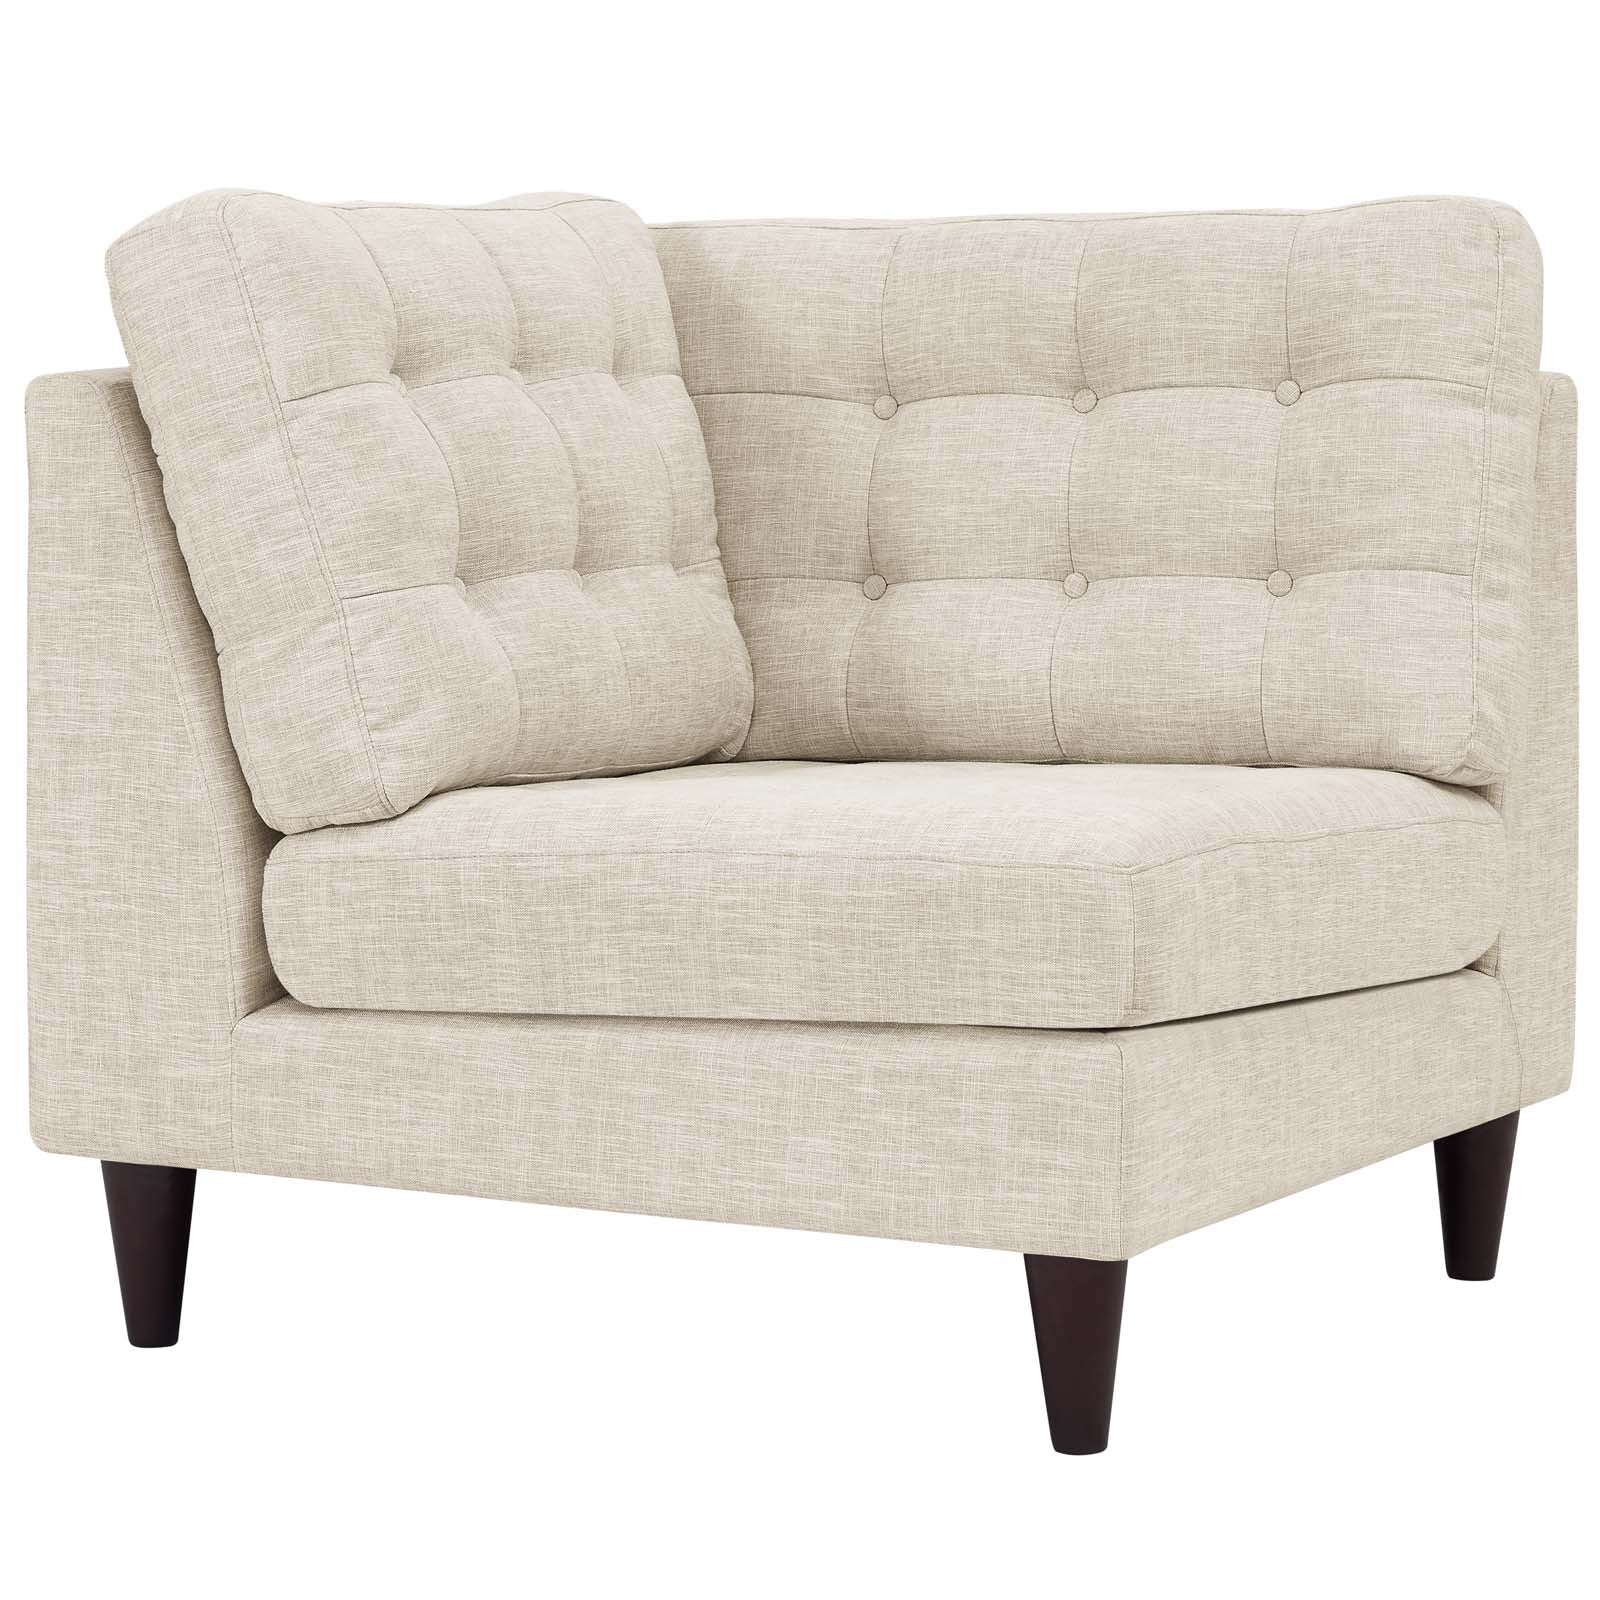 Modway Accent Chairs - Empress Upholstered Fabric Corner Sofa Beige